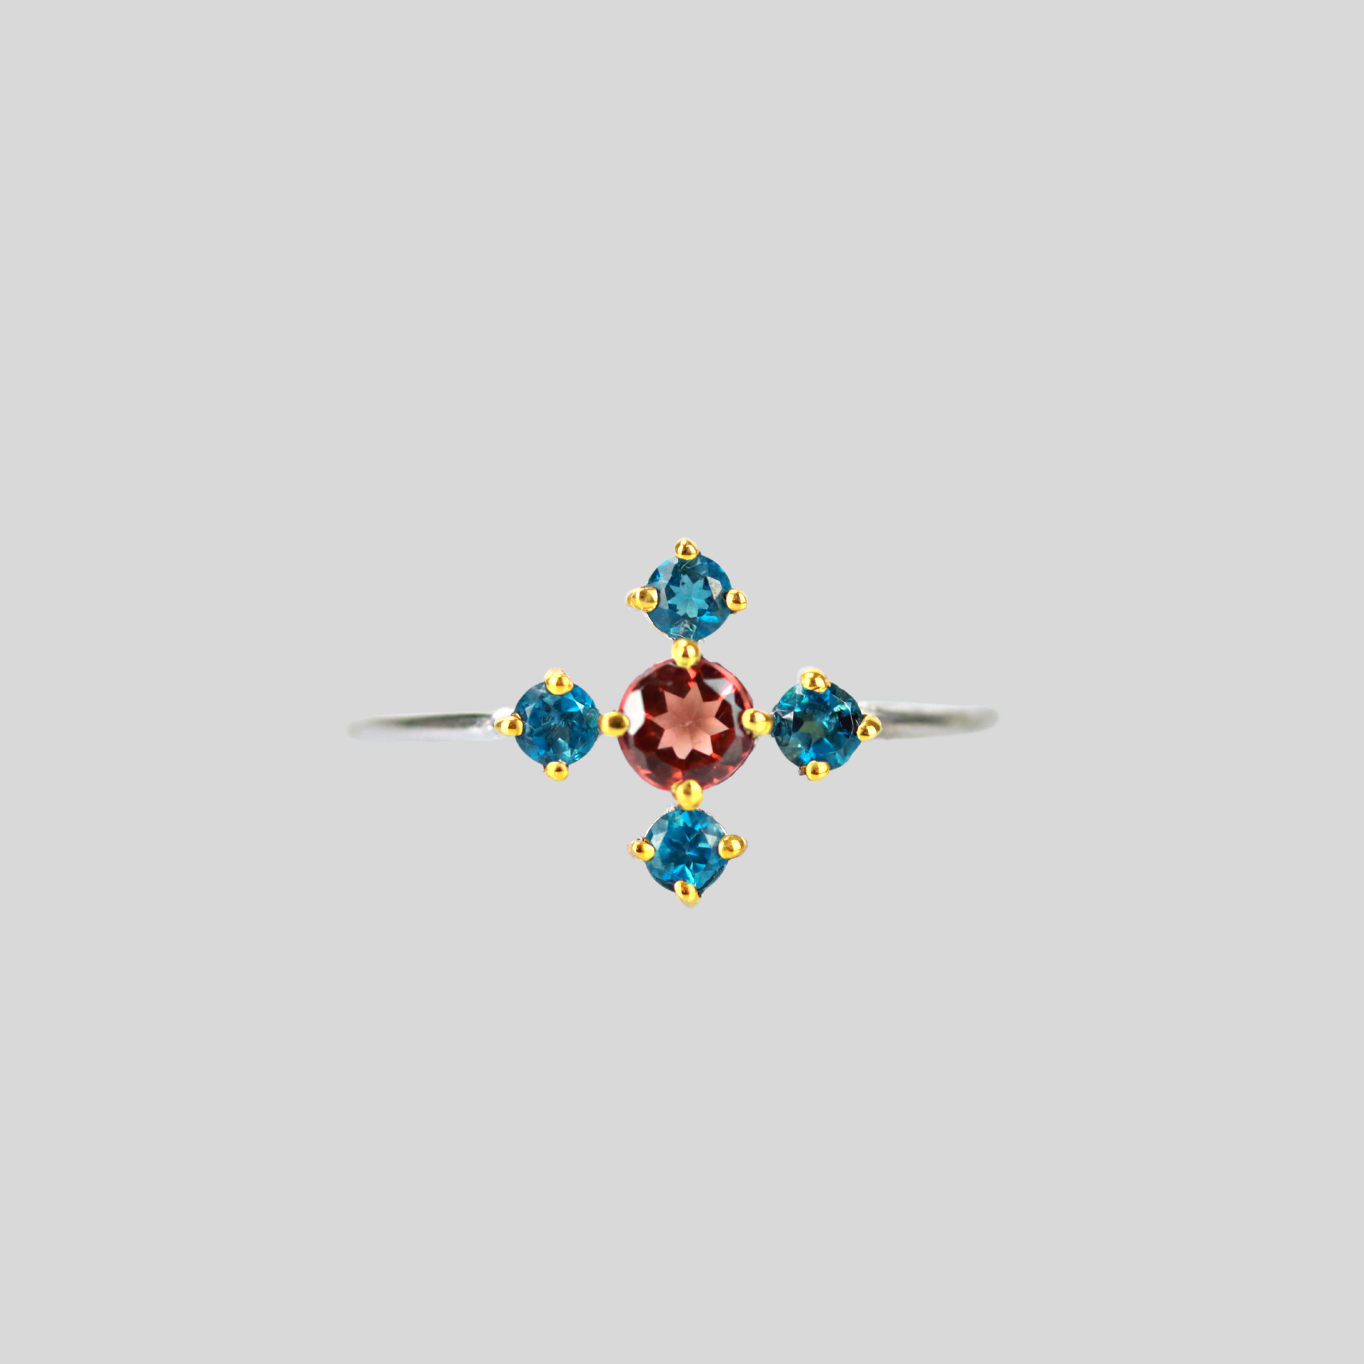 Twinkling flower ring with garnet and london topaz